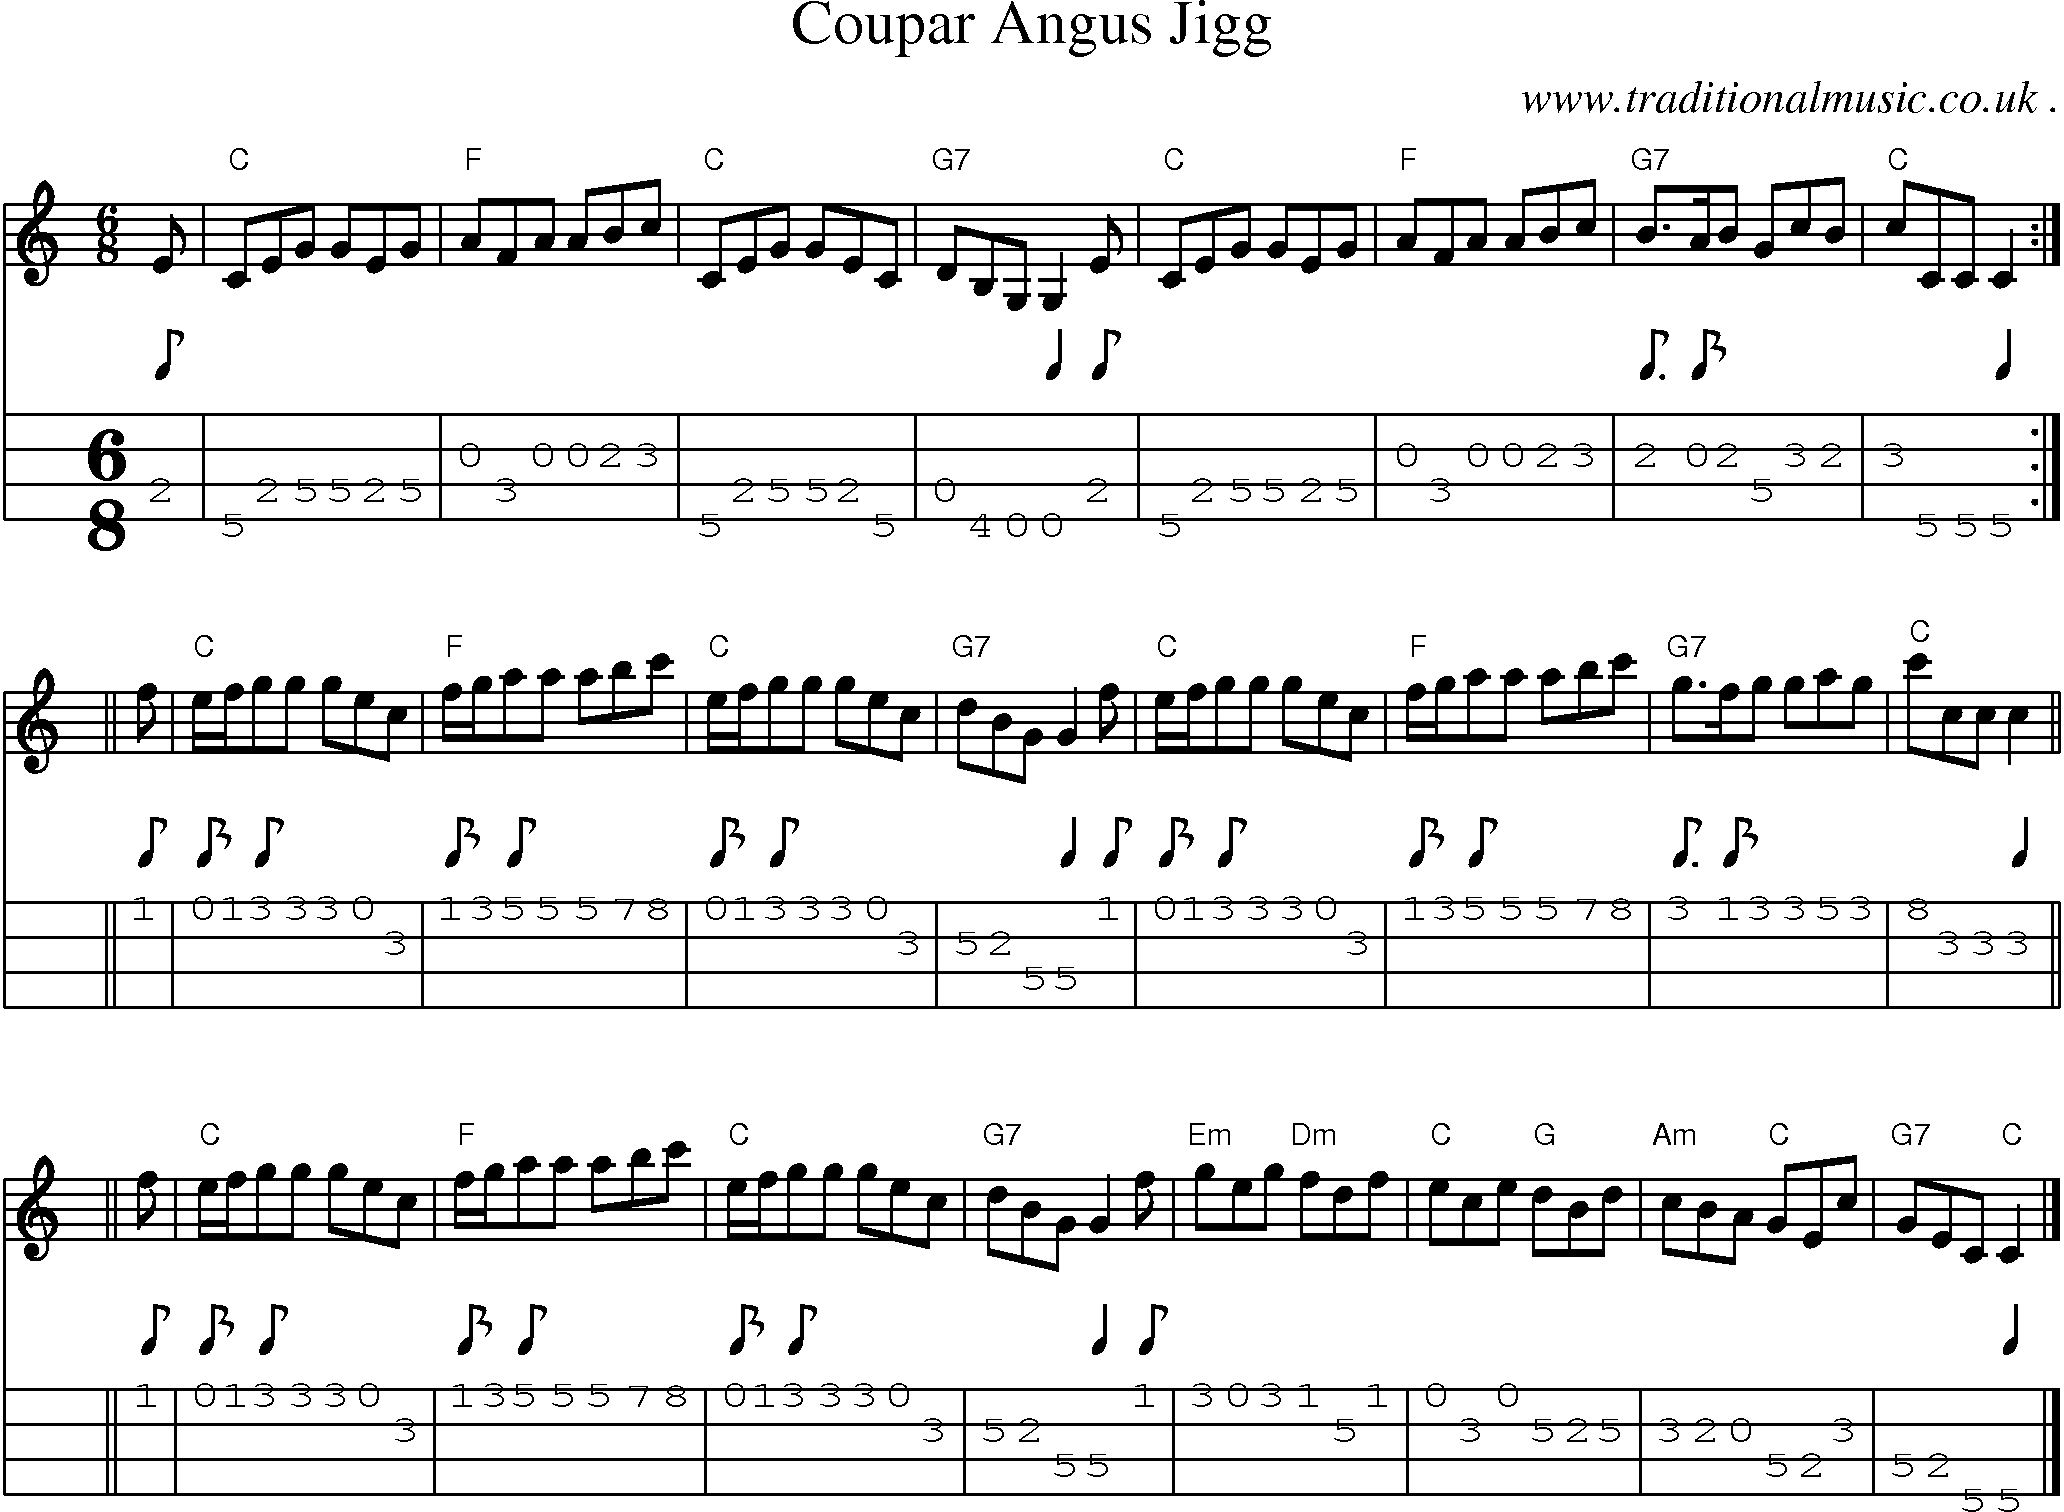 Sheet-music  score, Chords and Mandolin Tabs for Coupar Angus Jigg